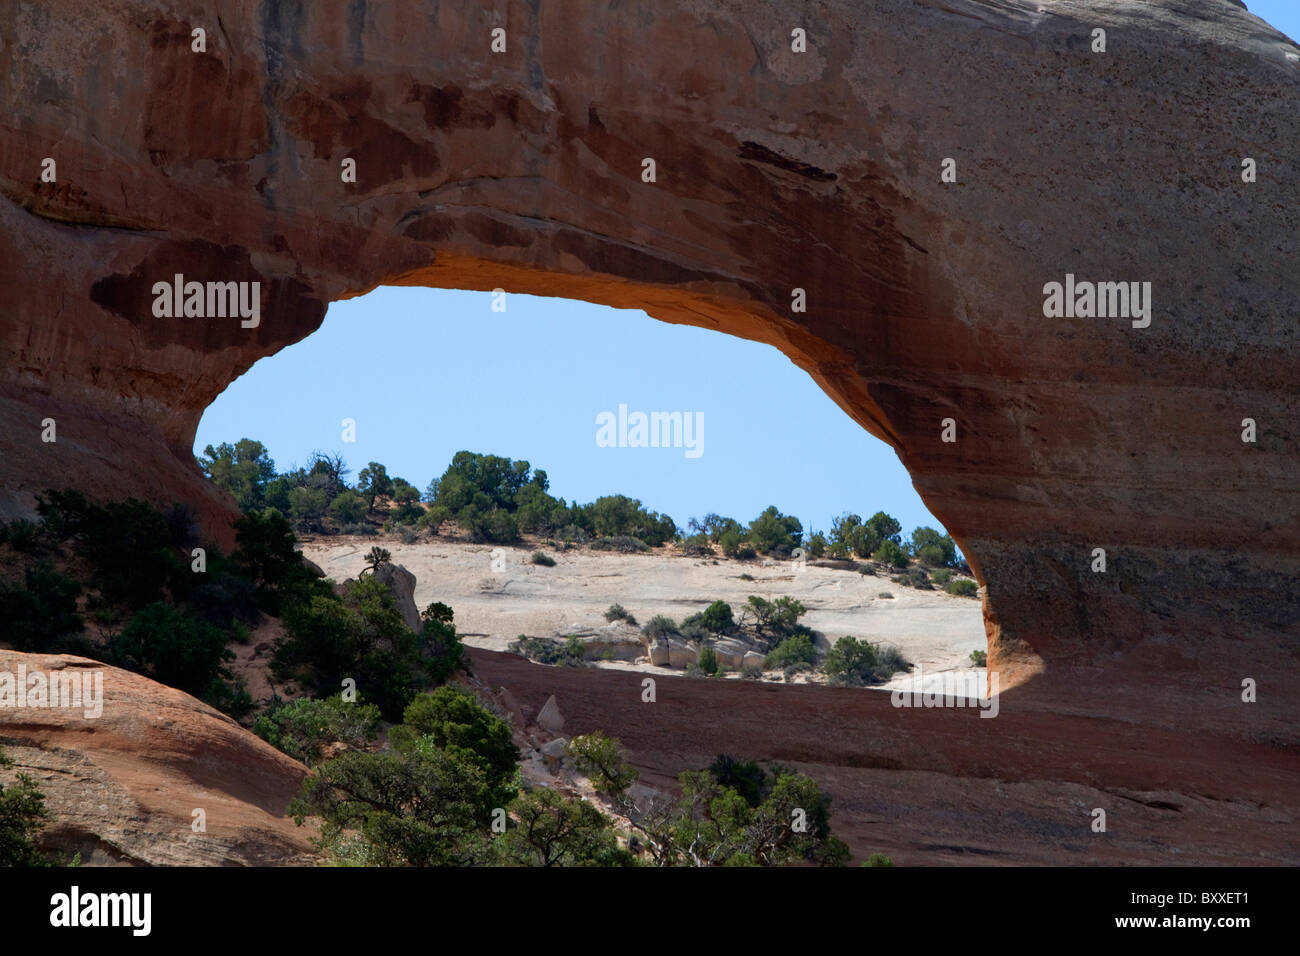 Wilson Arch is a natural sandstone arch along U.S. Route 191 near Moab, Utah, USA. Stock Photo